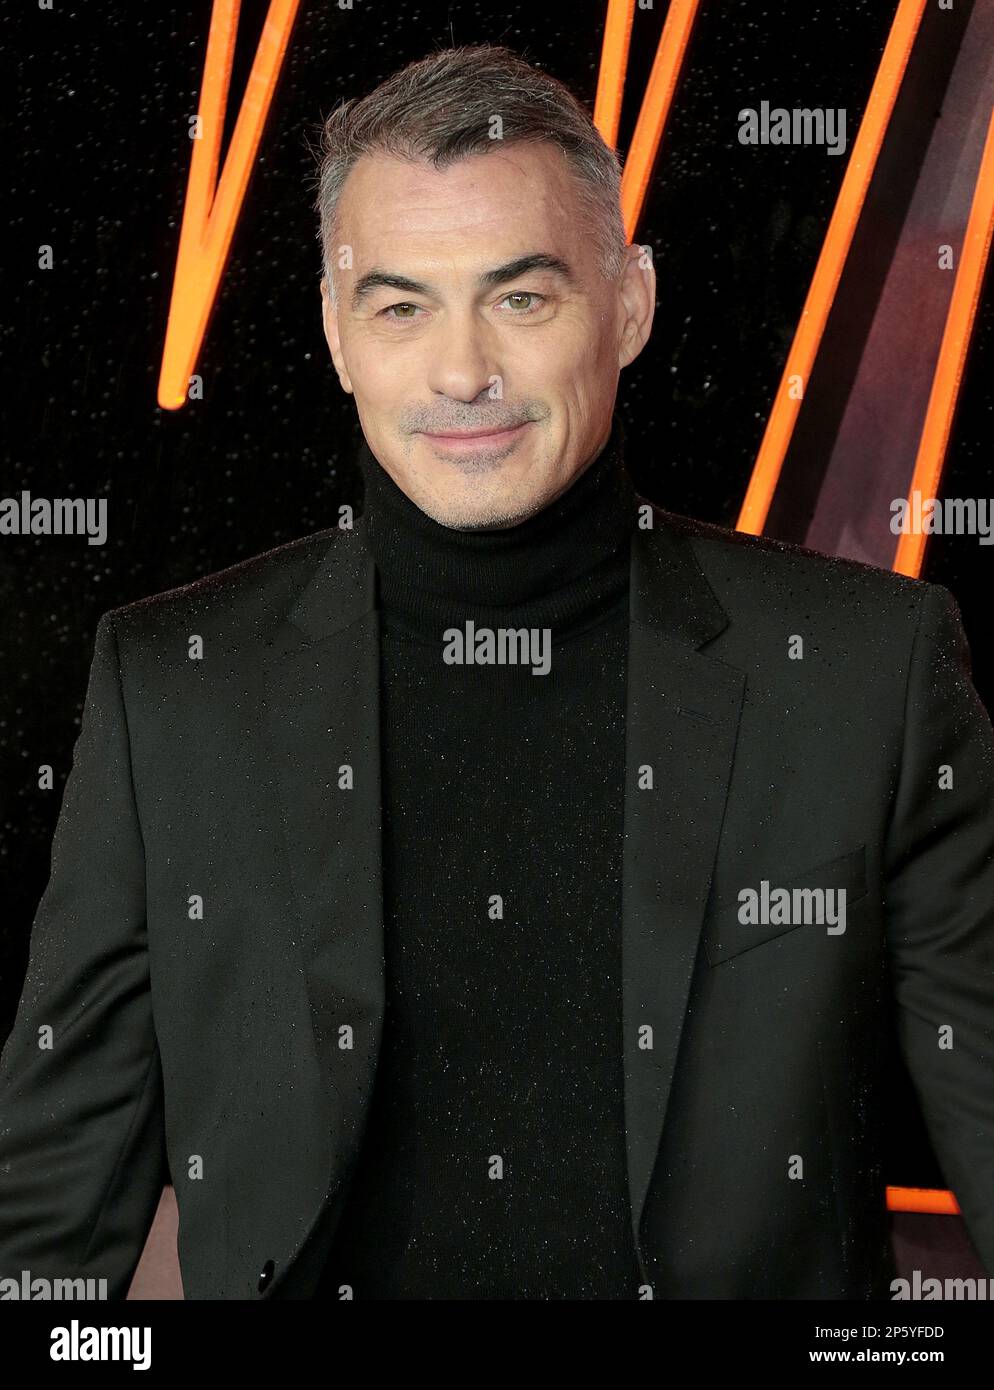 Mar 06, 2023 - London, England, UK - Chad Stahelski attending John Wick Chapter 4 UK Premiere at Cineworld Leicester Square Stock Photo